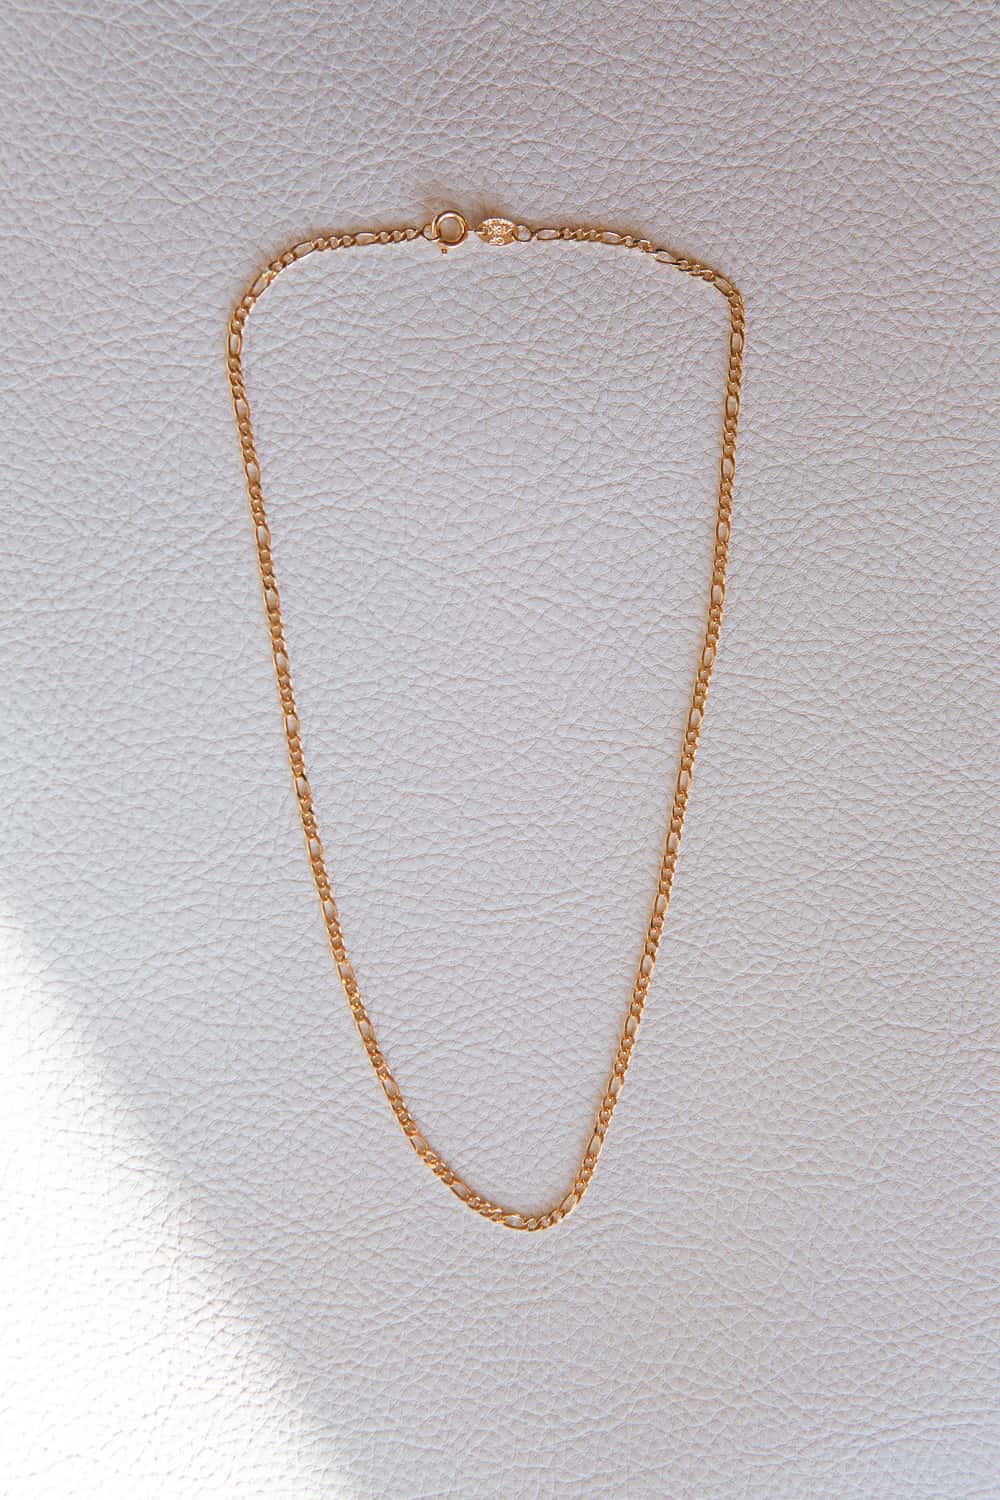 XP Jewelry --( 55 cm x 2.5 mm ) 22 inch Figaro 1:1 Small Chain Necklaces